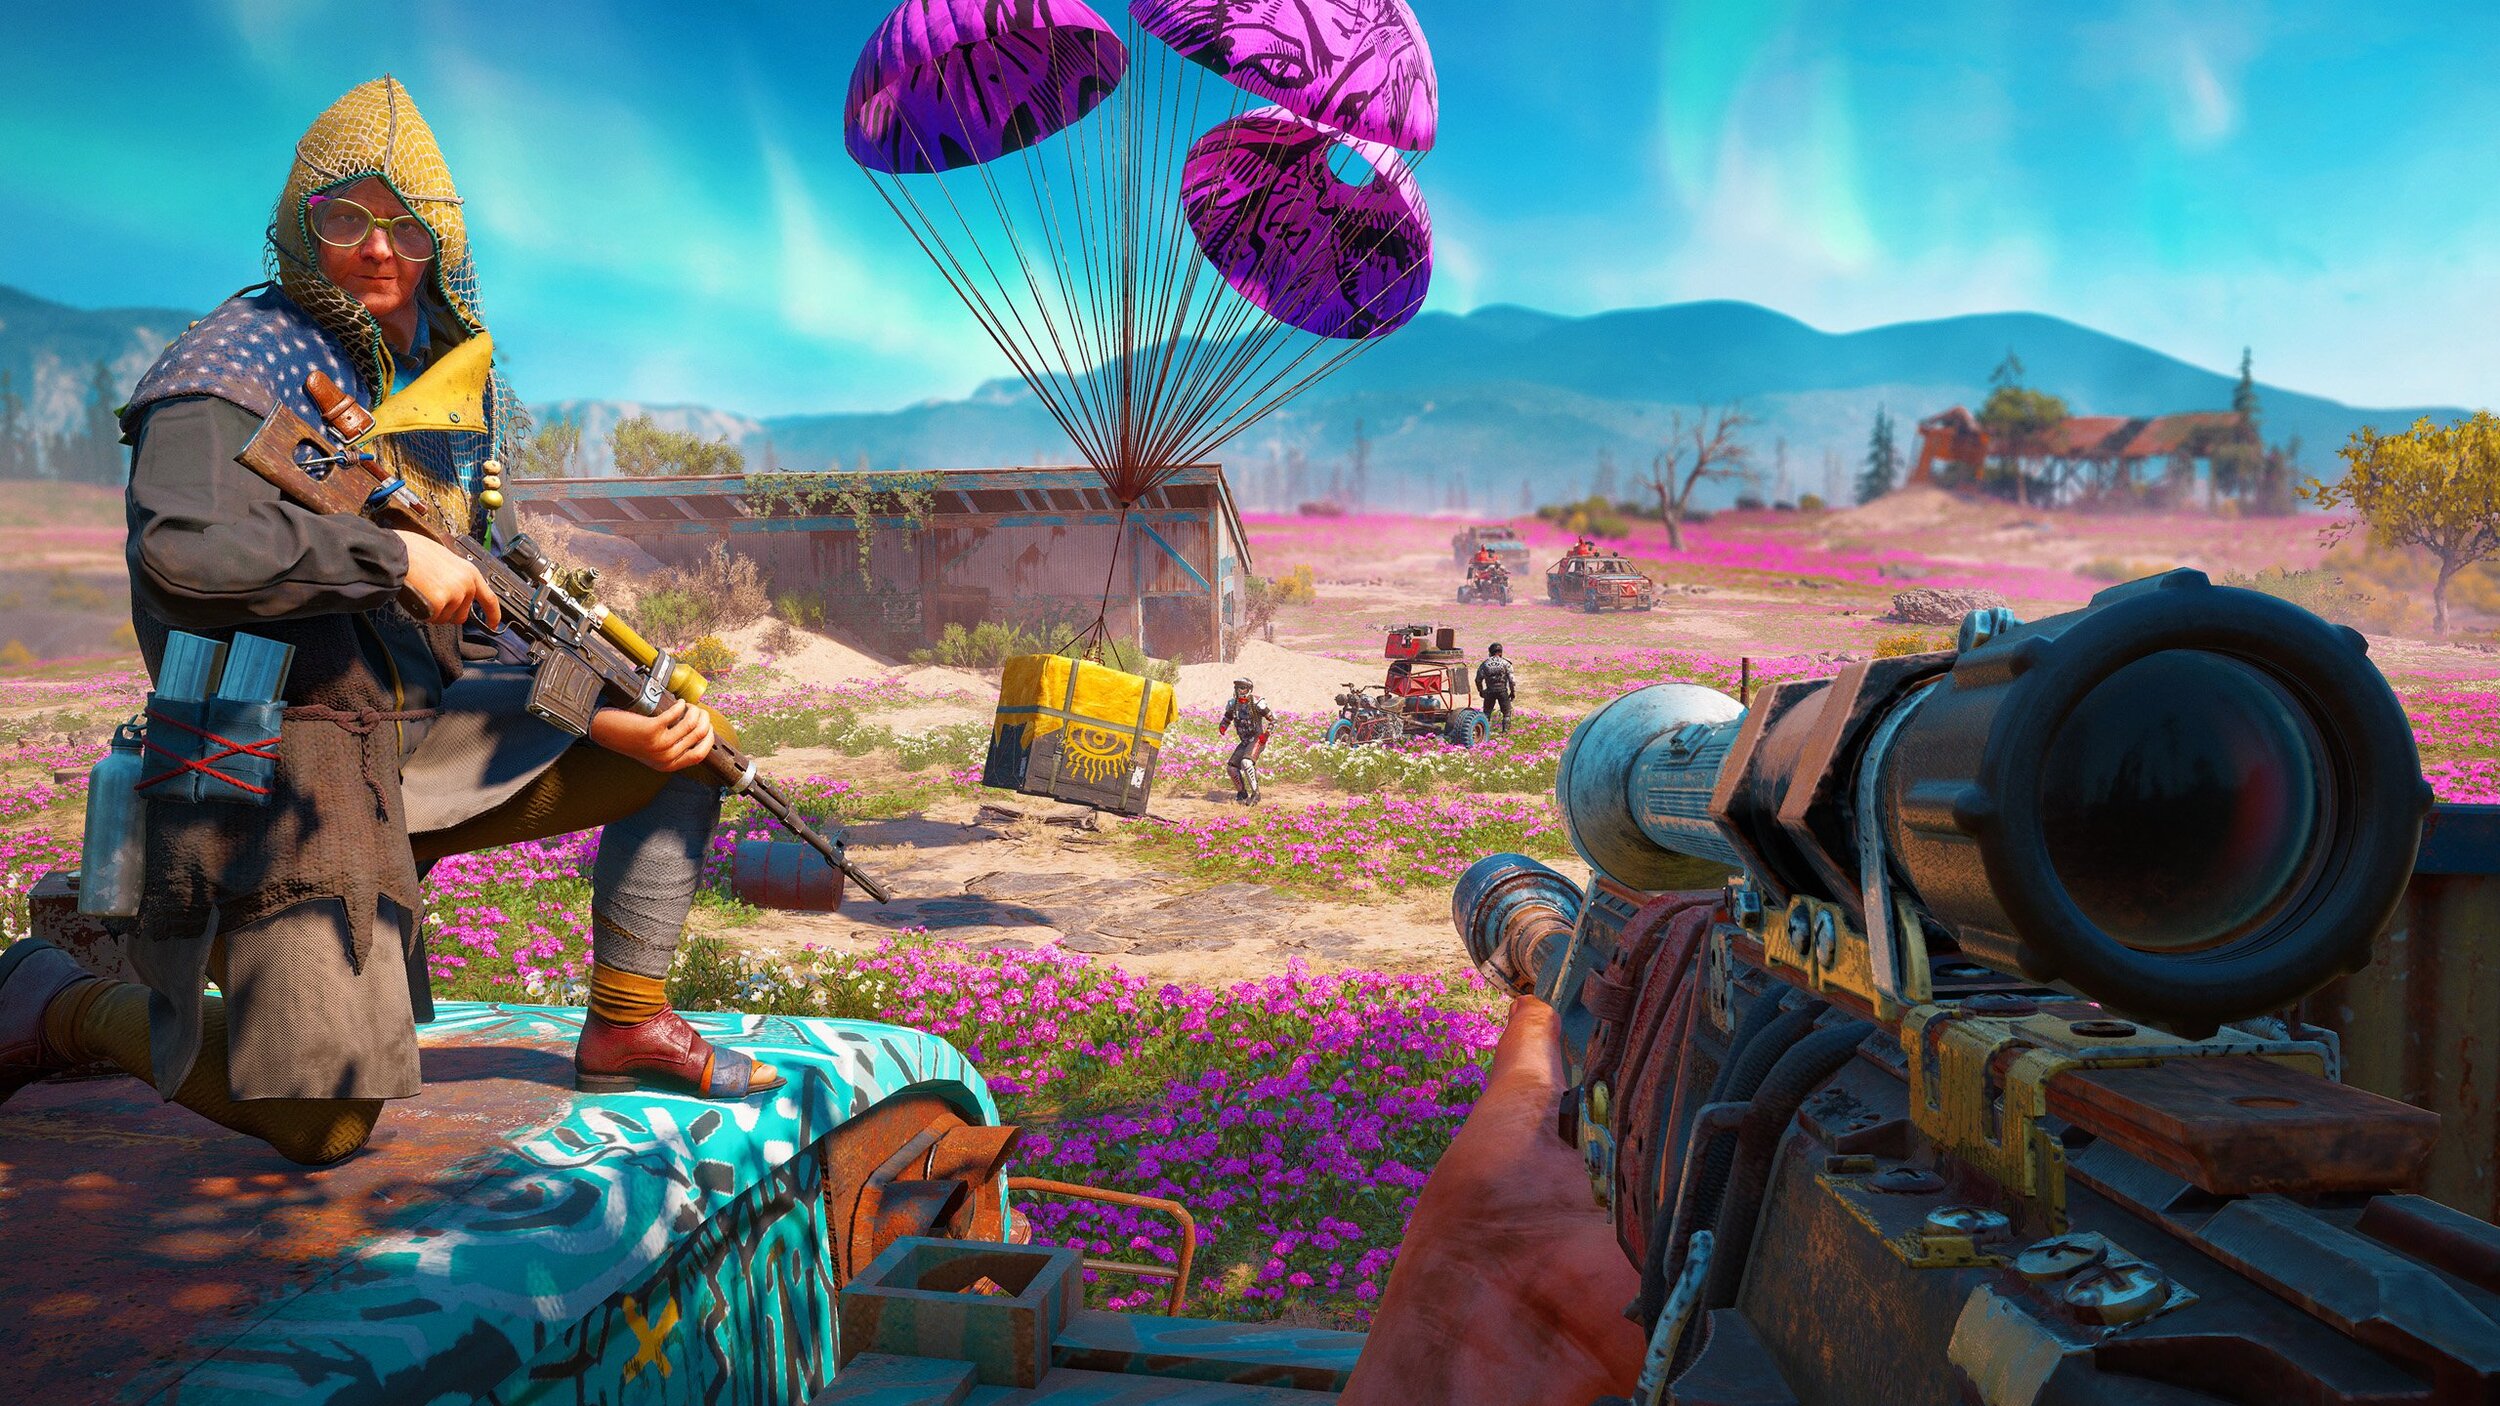 Far Cry New Dawn Wallpapers  Top 20 Best Far Cry New Dawn Wallpapers  HQ 